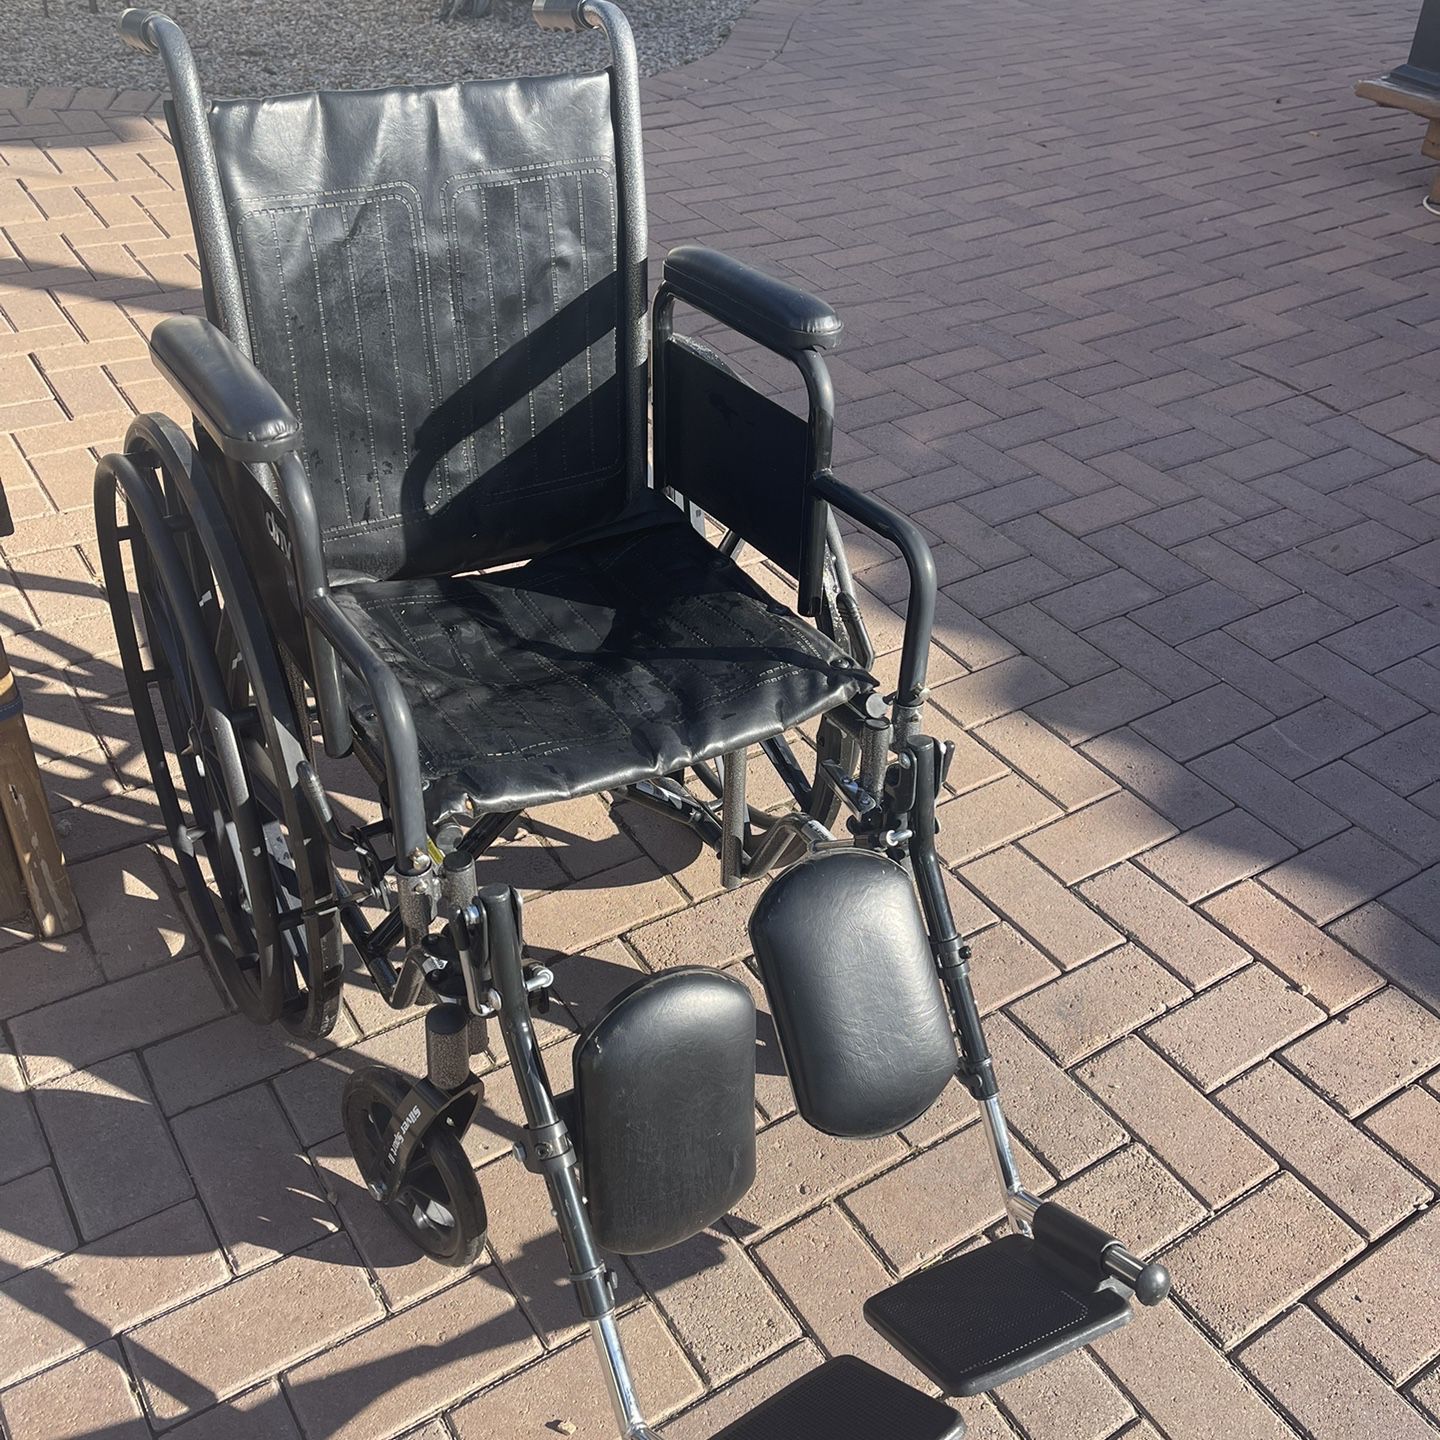 Drive Wheelchair - 18” Seat - Teen or Small Adult 